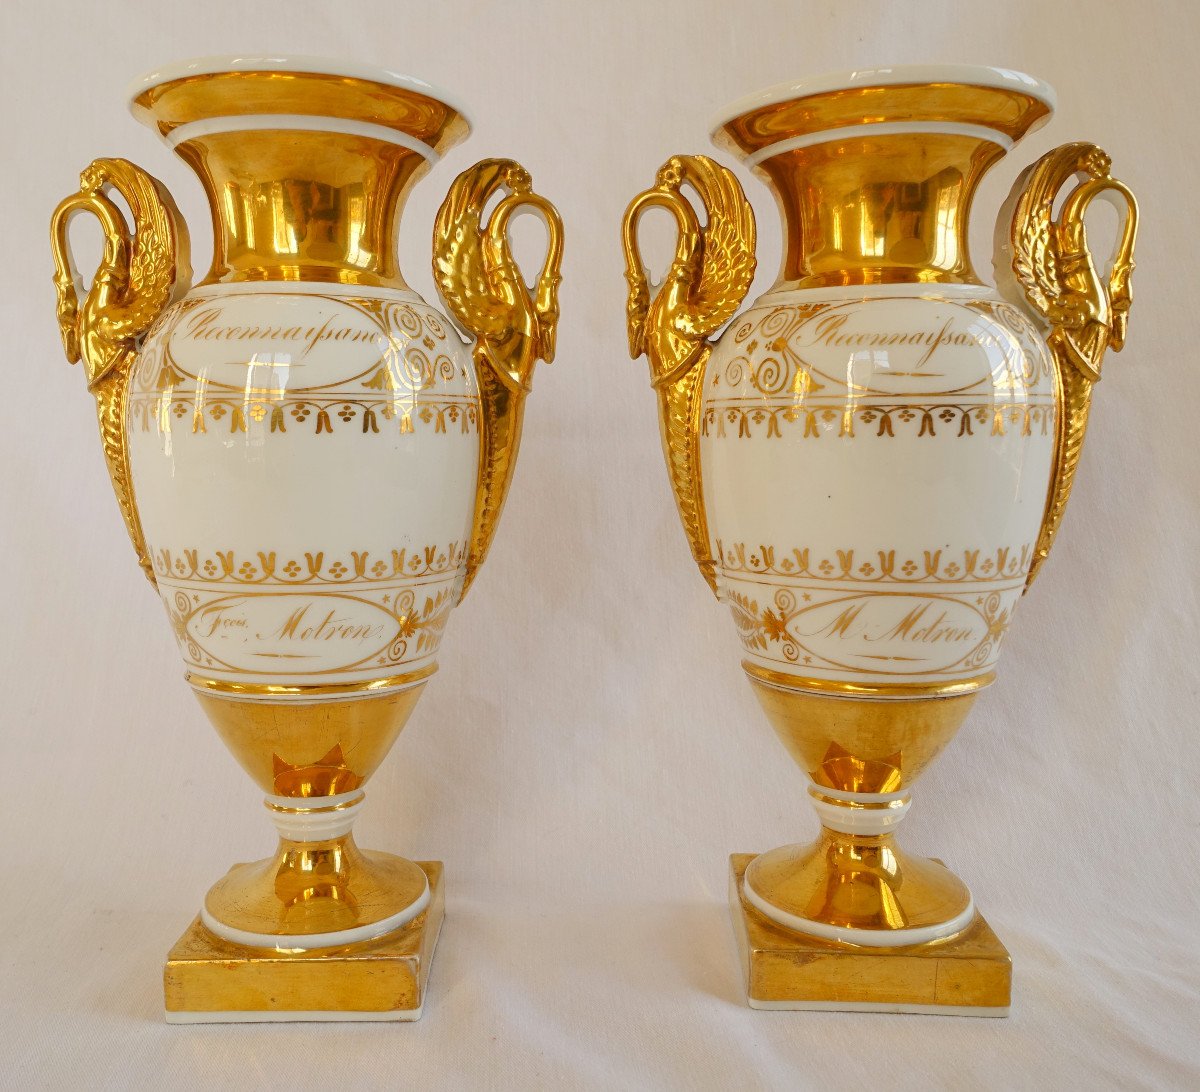 Pair Of Empire Paris Porcelain Vases Enhanced With Fine Gold, Early 19th Century